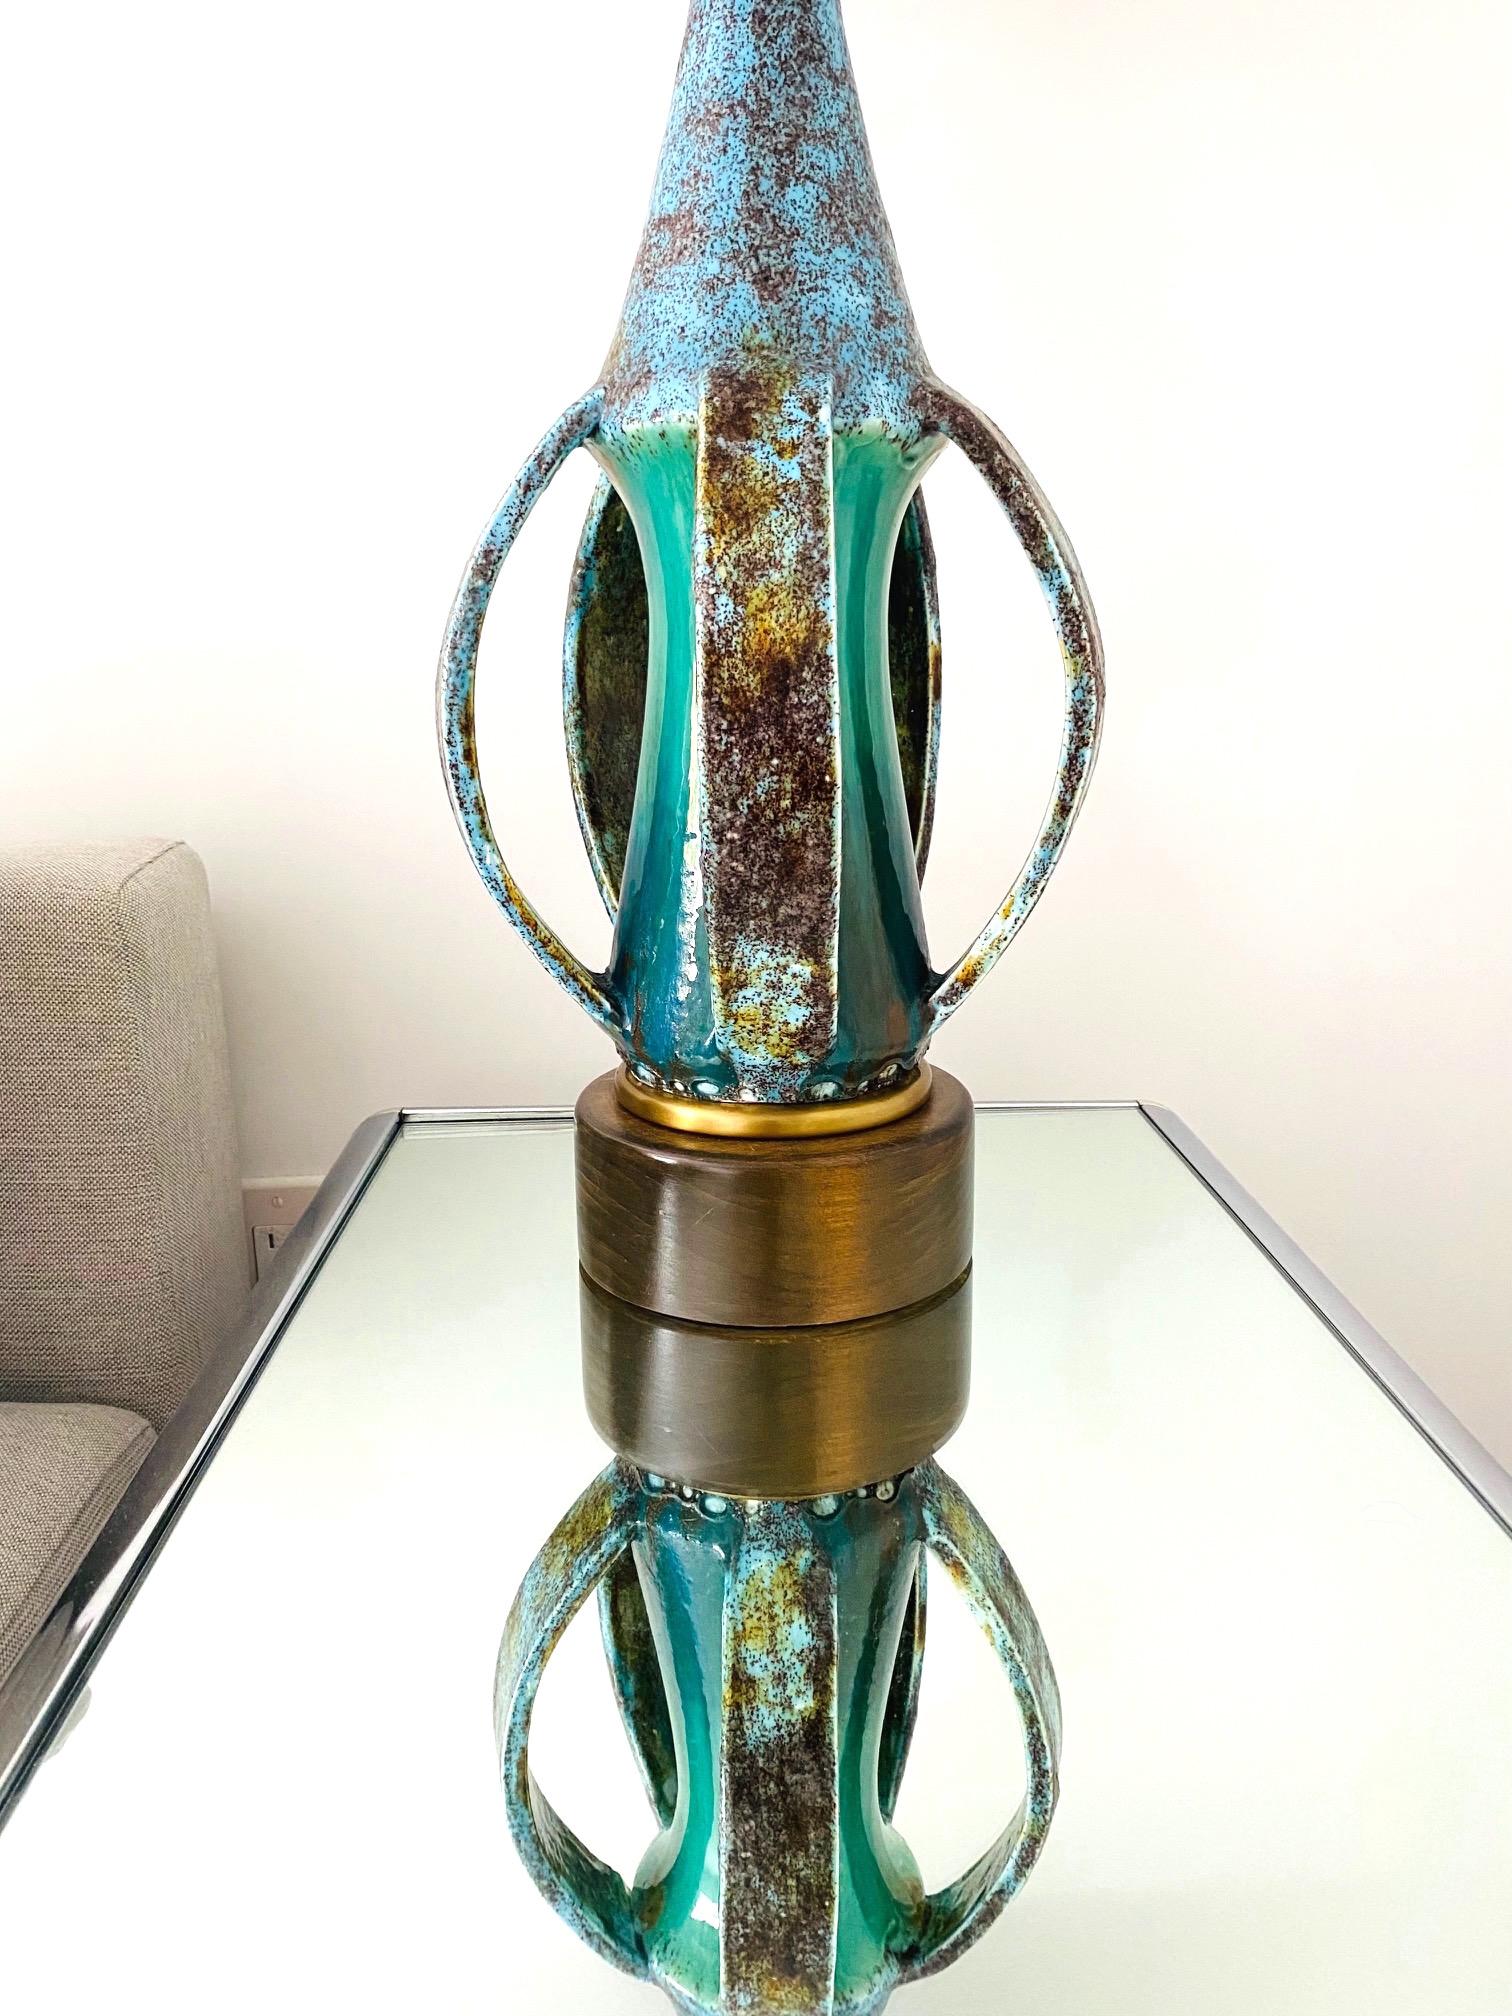 Mid-Century Modern Sculptural Pottery Lamp in Turquoise & Blue, Denmark C. 1960s For Sale 4